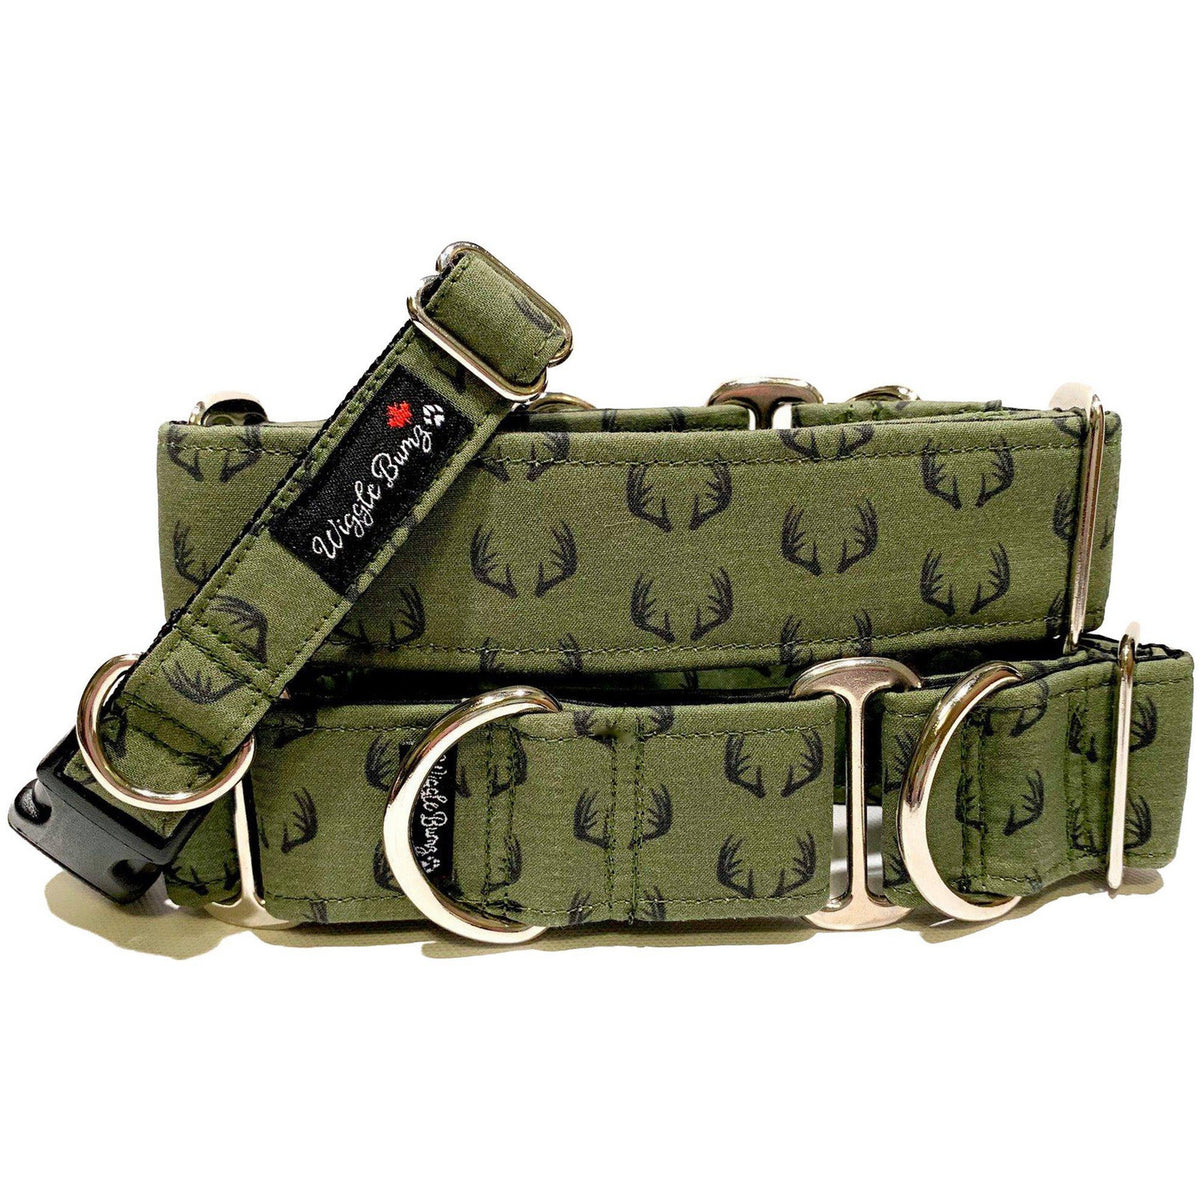 Army Buck Dog Collar by Big Paw Shop featuring a whimsical design on cotton fabric